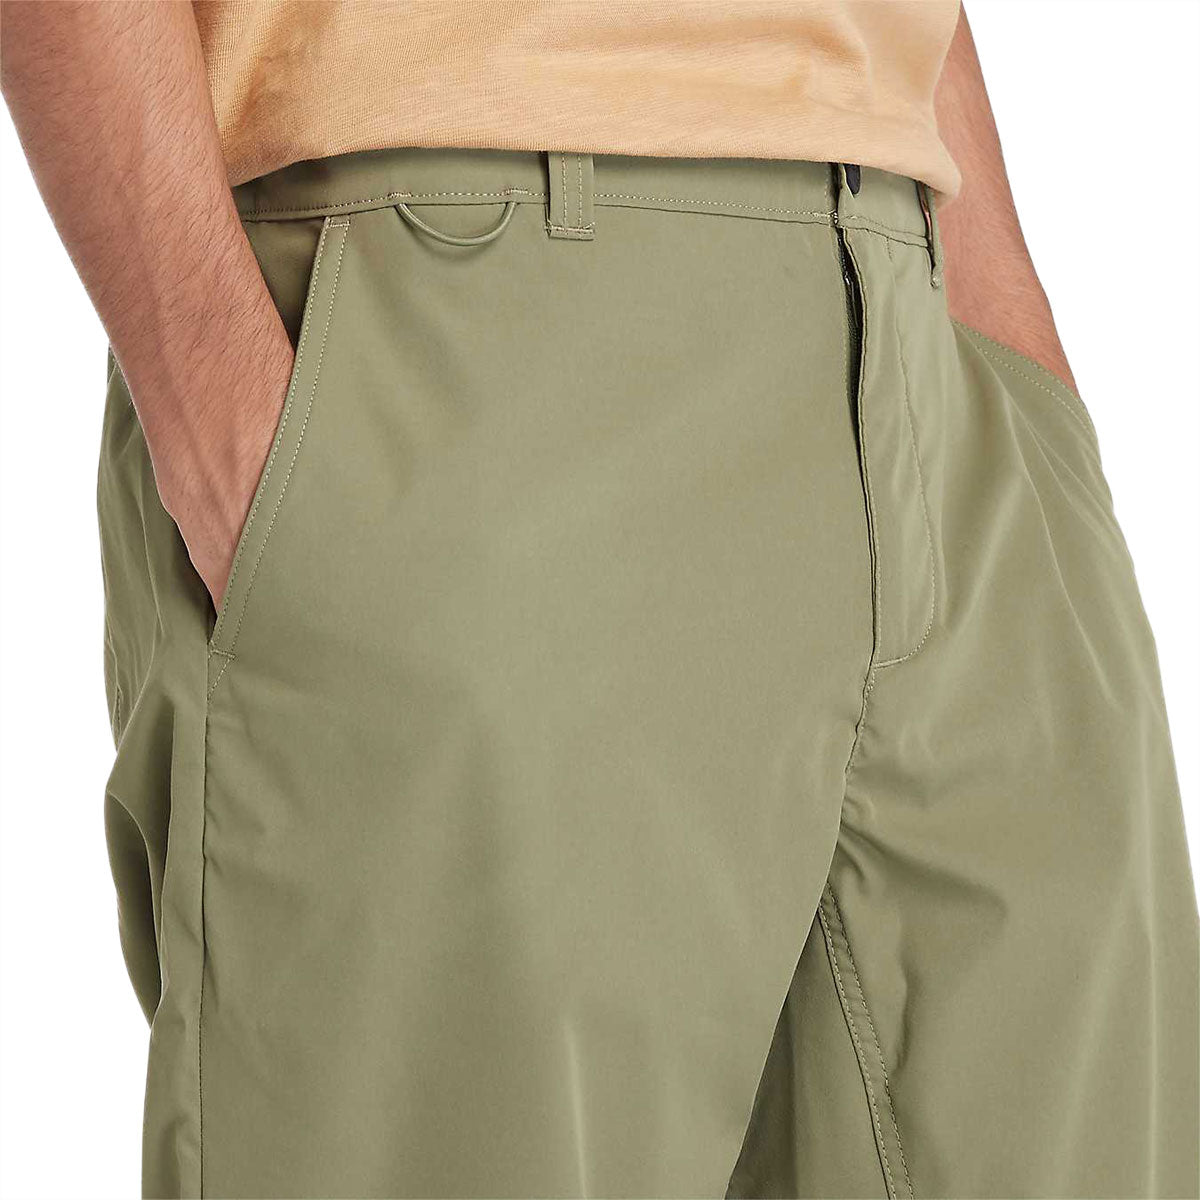 Timberland Dwr Jogger  Pants - Cassel Earth image 3